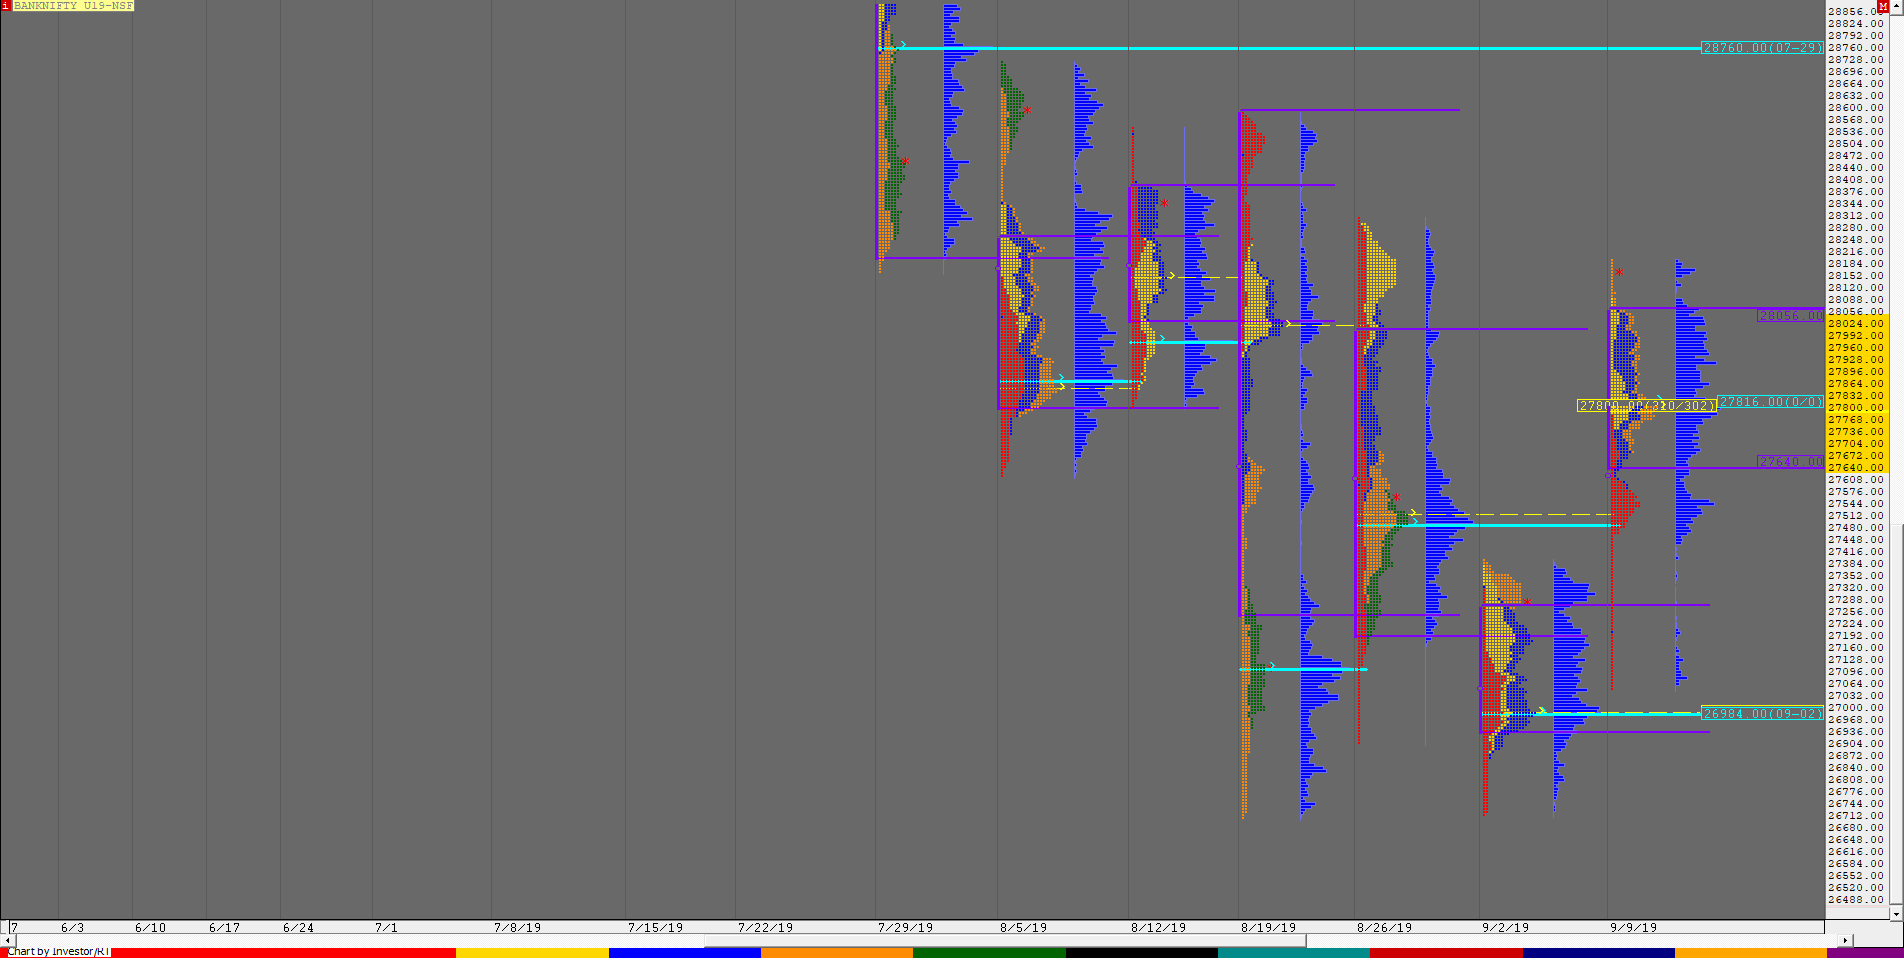 Bnf F 2 Weekly Charts (9Th To 13Th September) And Market Profile Analysis Banknifty Futures, Charts, Day Trading, Intraday Trading, Intraday Trading Strategies, Market Profile, Market Profile Trading Strategies, Nifty Futures, Order Flow Analysis, Support And Resistance, Technical Analysis, Trading Strategies, Volume Profile Trading